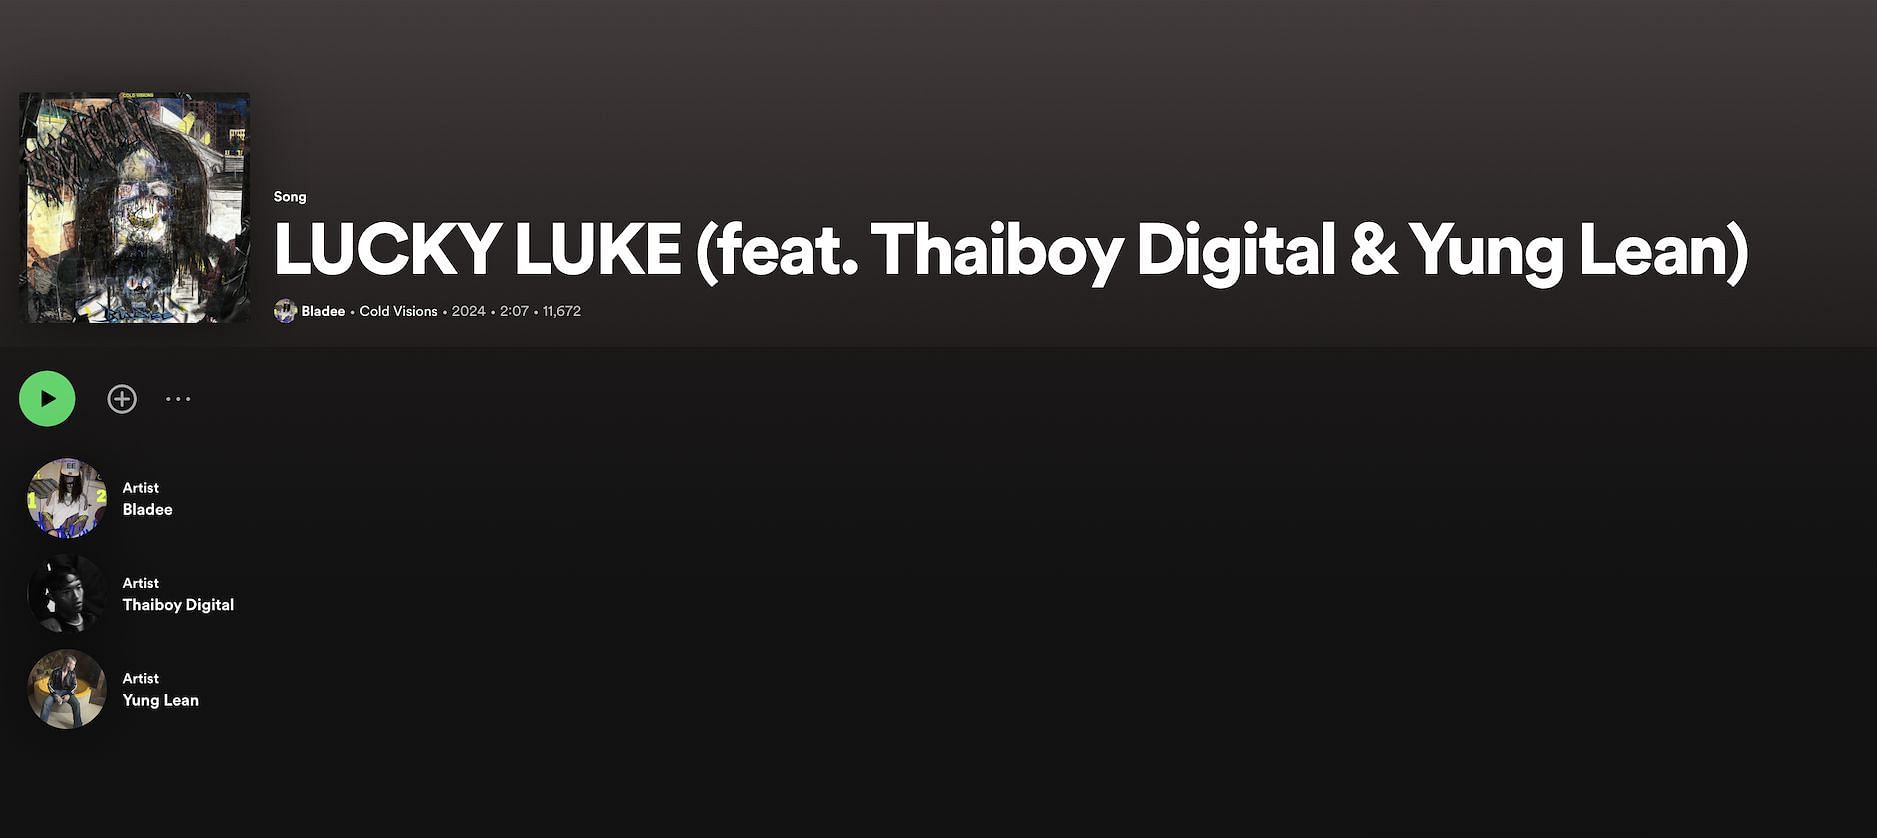 Track 20 from Bladee&#039;s new album &#039;Cold Visions&#039; (Image via Spotify)